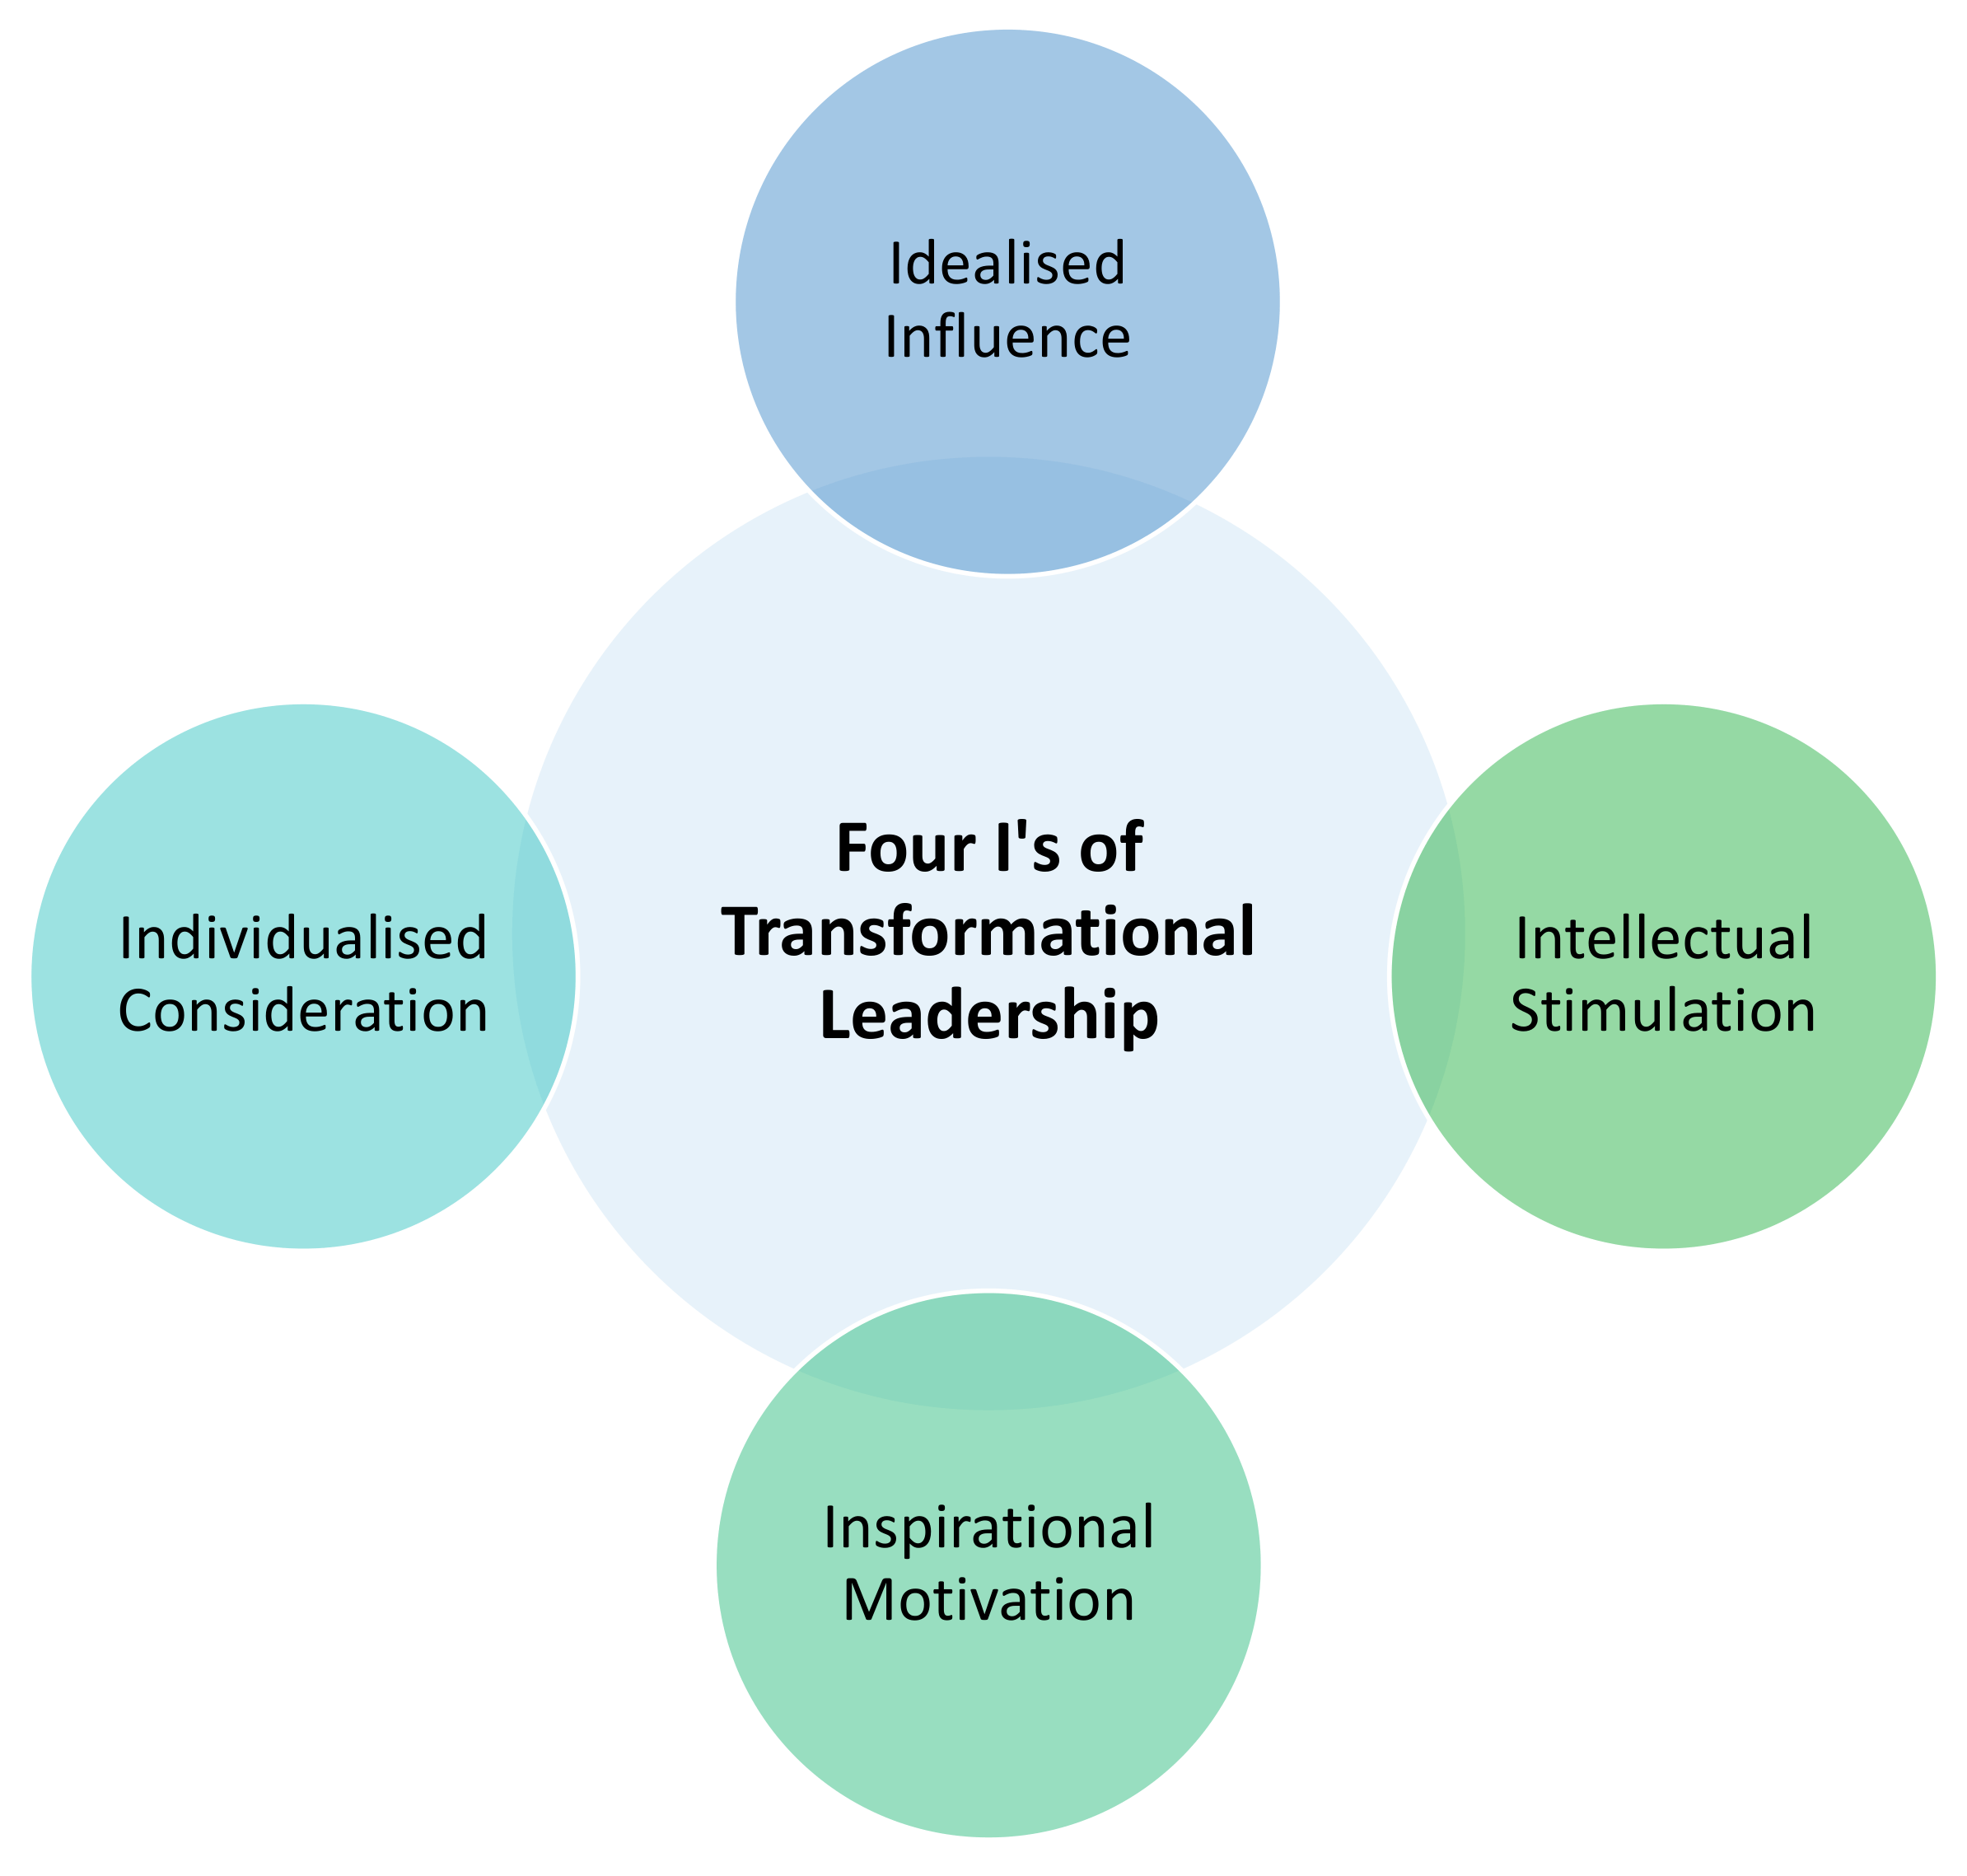 The Four I's of Transformational Leadership